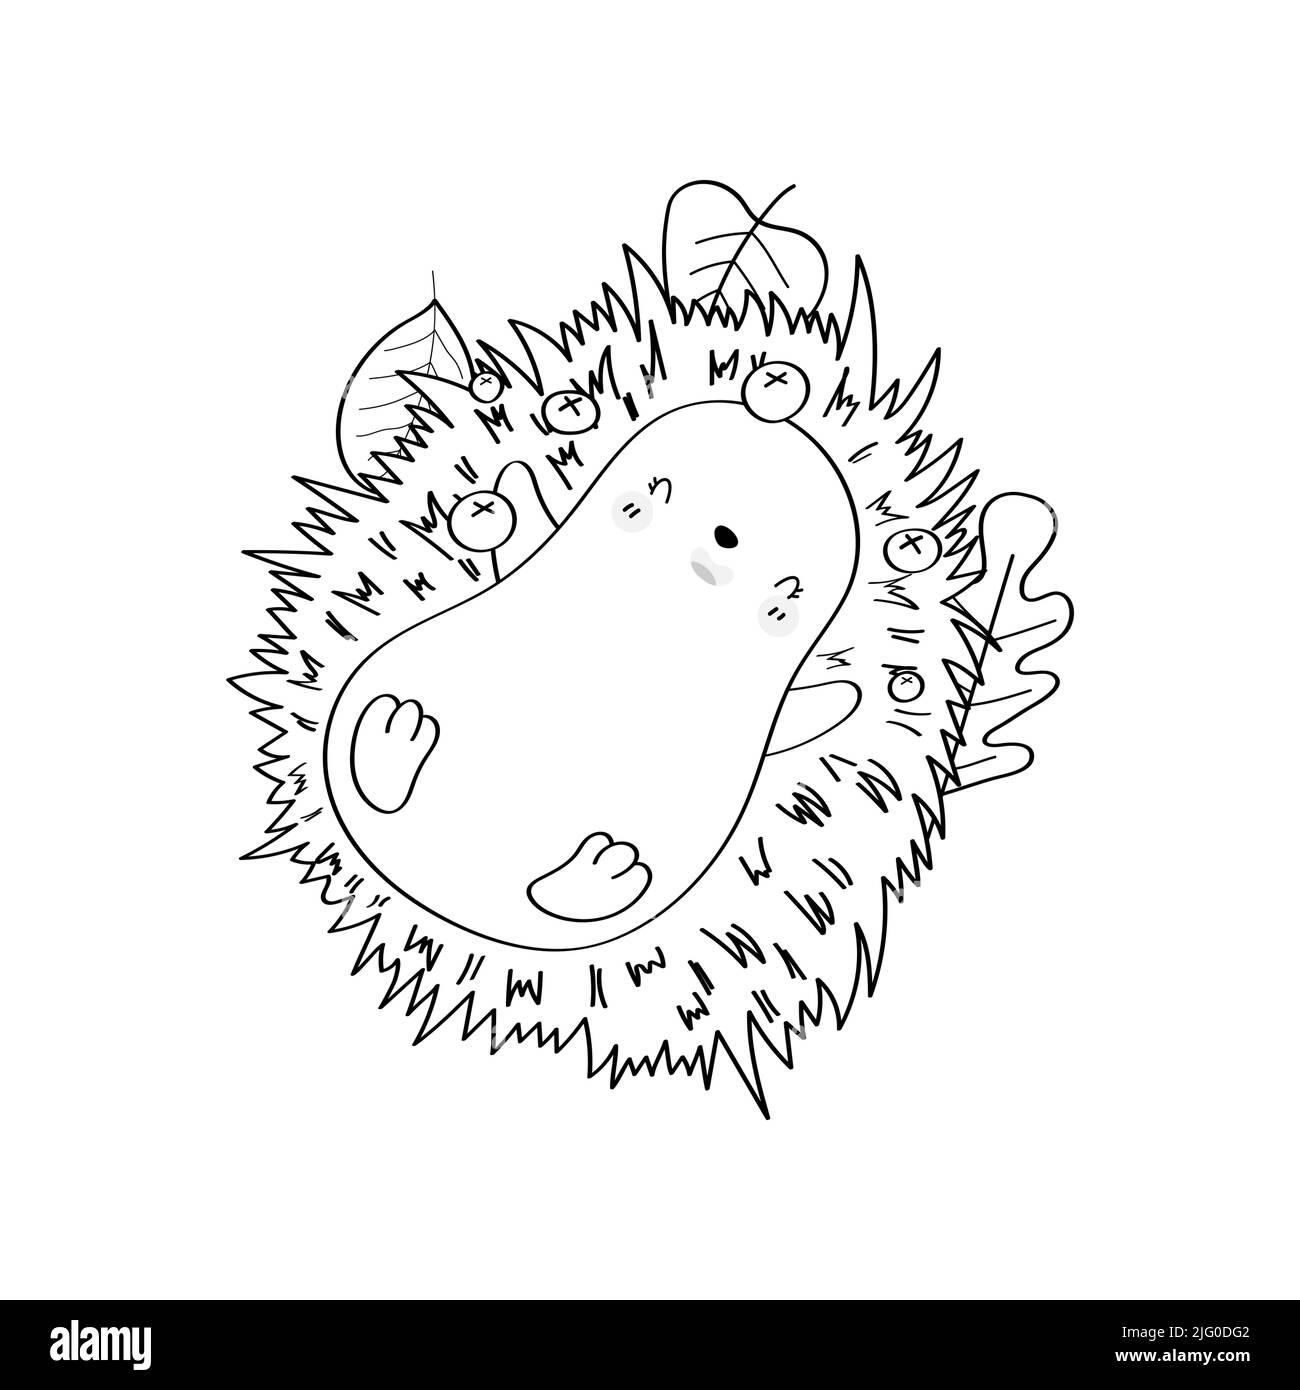 Cute Hedgehog Clipart Black and White for Kids Holidays and Goods. Happy Clip Art Hedgehog for Coloring Page. Vector Illustration of a Forest Animal Stock Vector